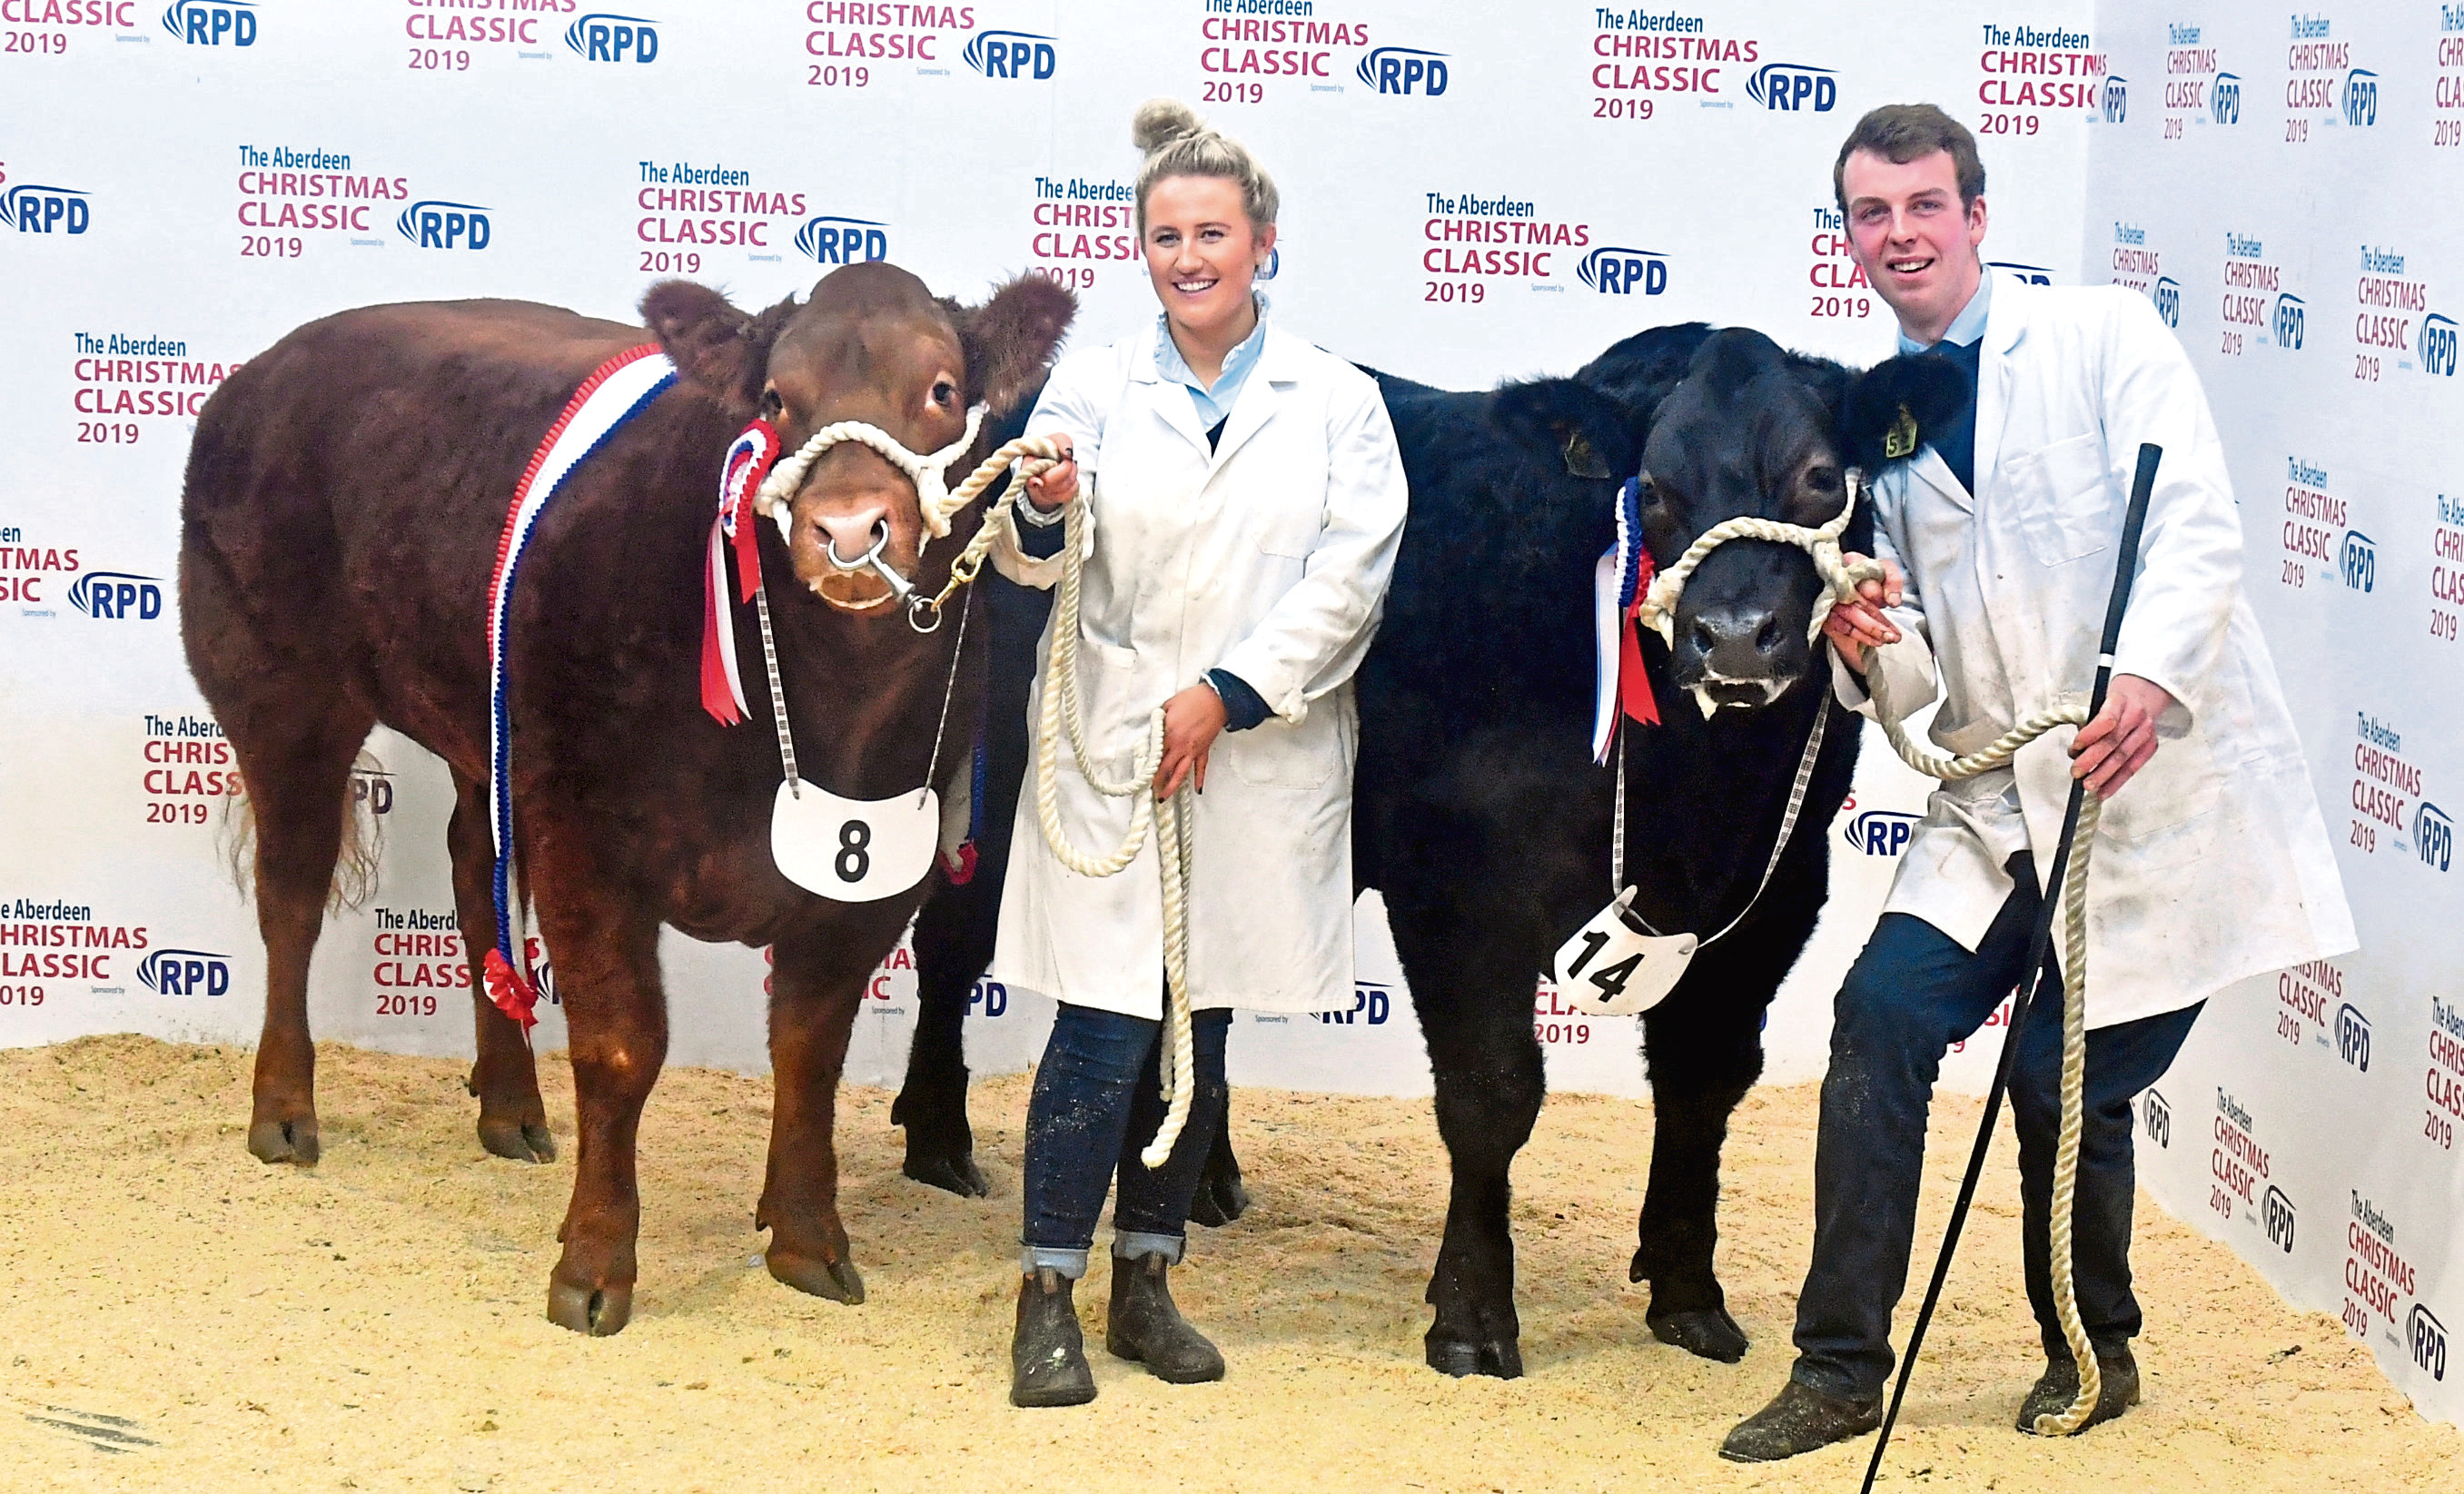 Rebecca Stuart with the overall champion, Cinnamon, and William Moir with the reserve champion, Gazza.